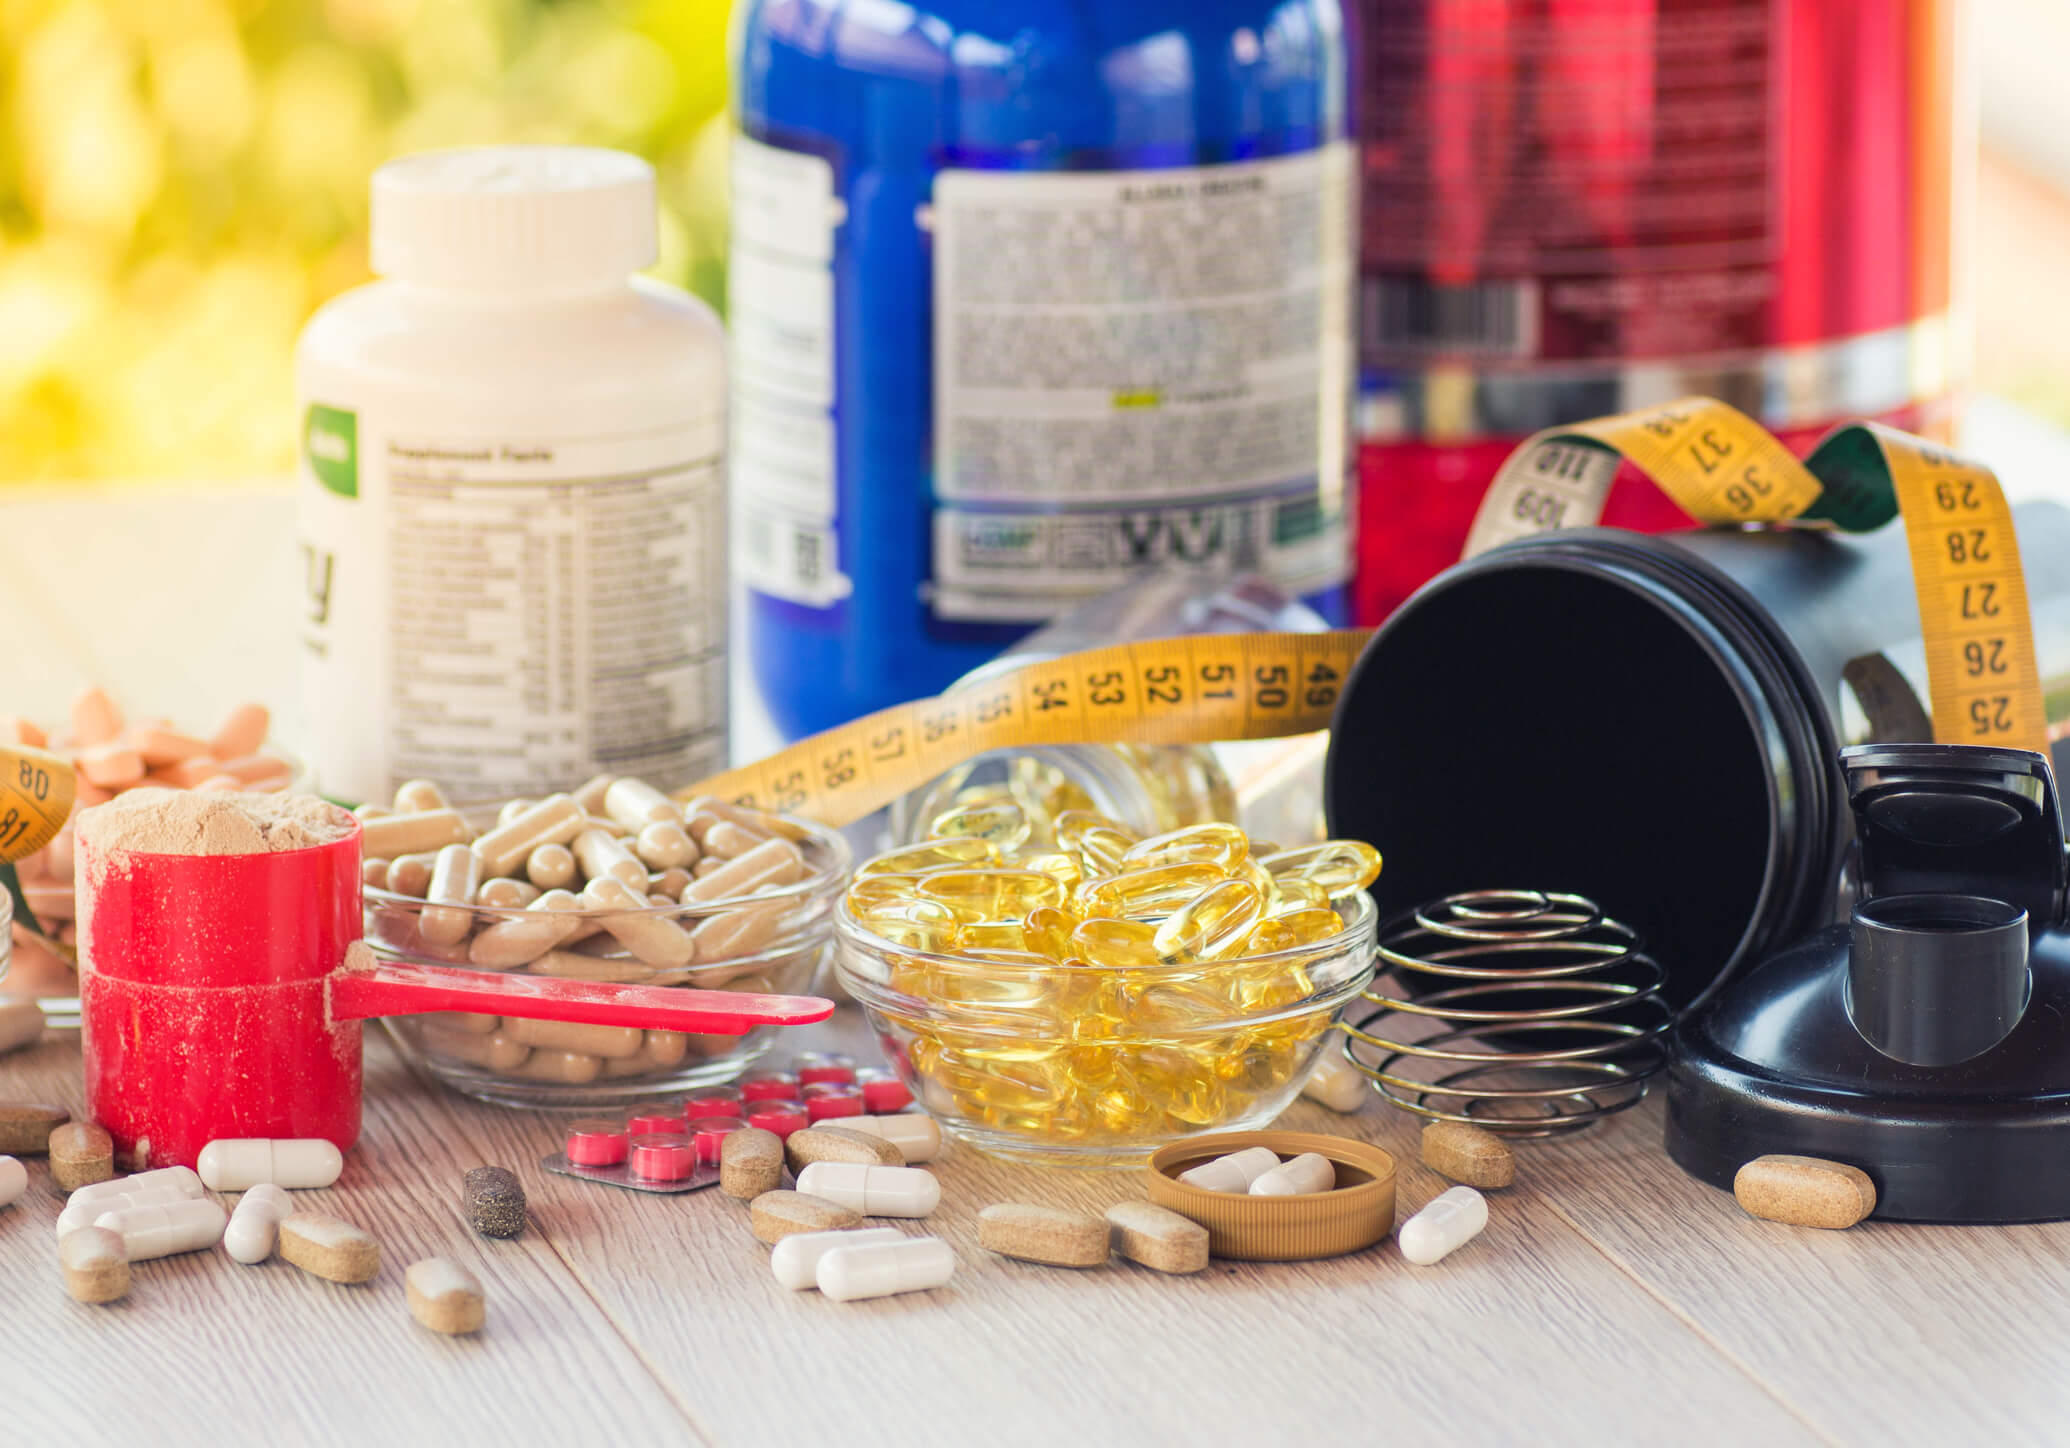 Nutritional supplements in capsules and tablets used to help achieve a six pack